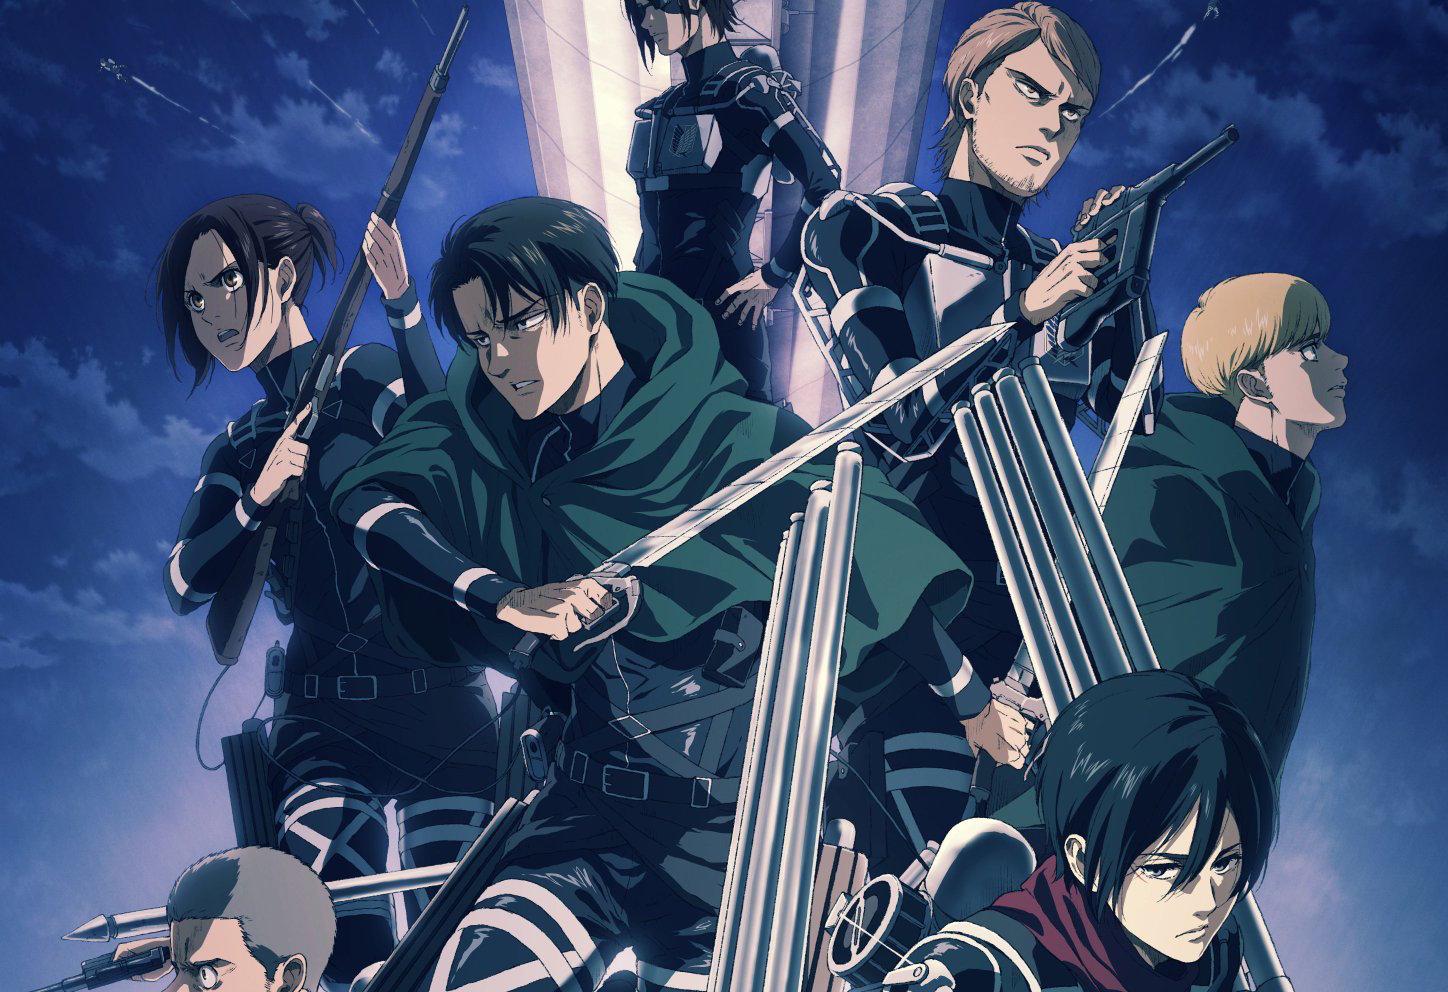 Netflix Reportedly Edits Attack on Titan Finale, Omitting Crucial Moment